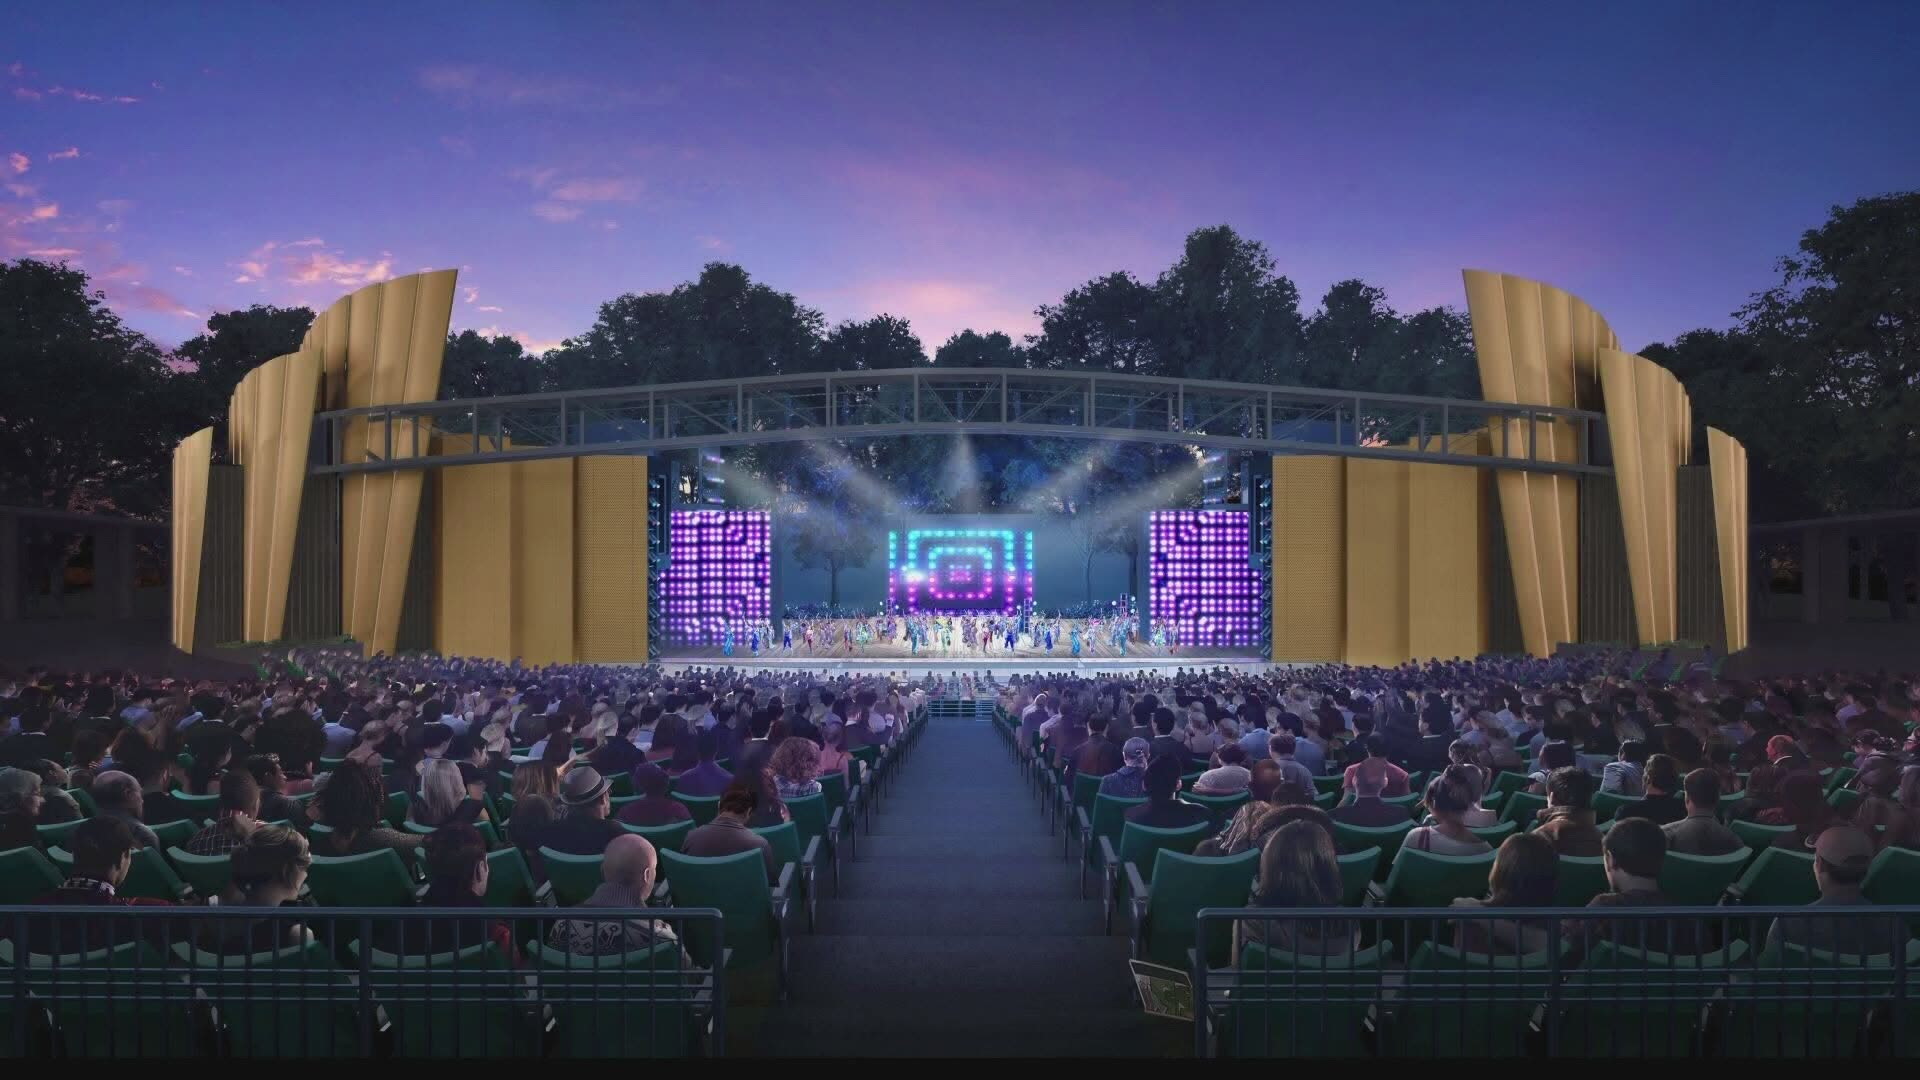 The Muny said it is putting plans in place to hopefully open in late July